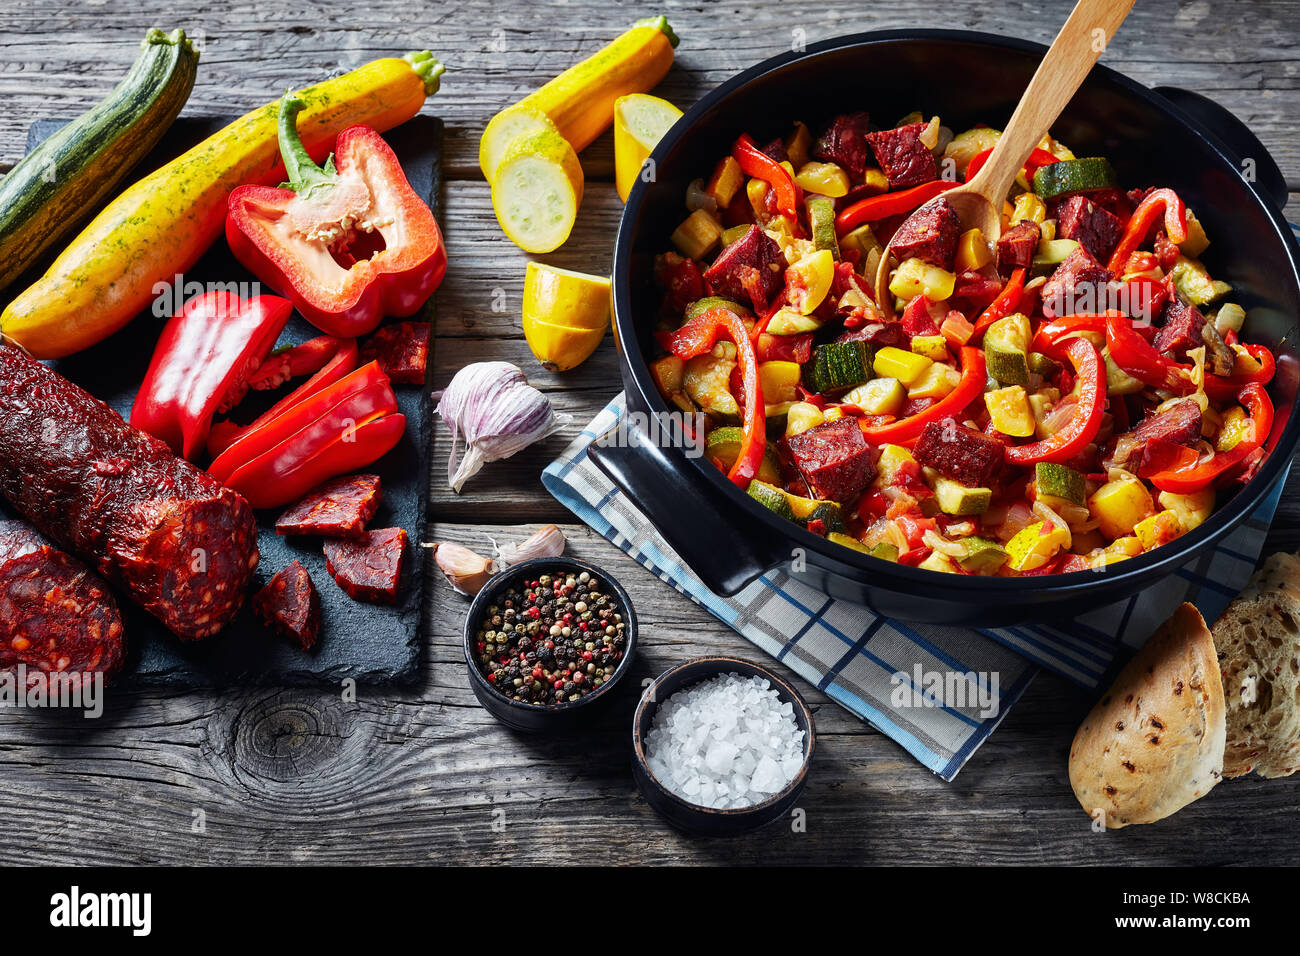 Pisto manchego - vegetable stew with chorizo sausages in a black pan on a rustic wooden table, spanish cuisine, horizontal view from above, Stock Photo